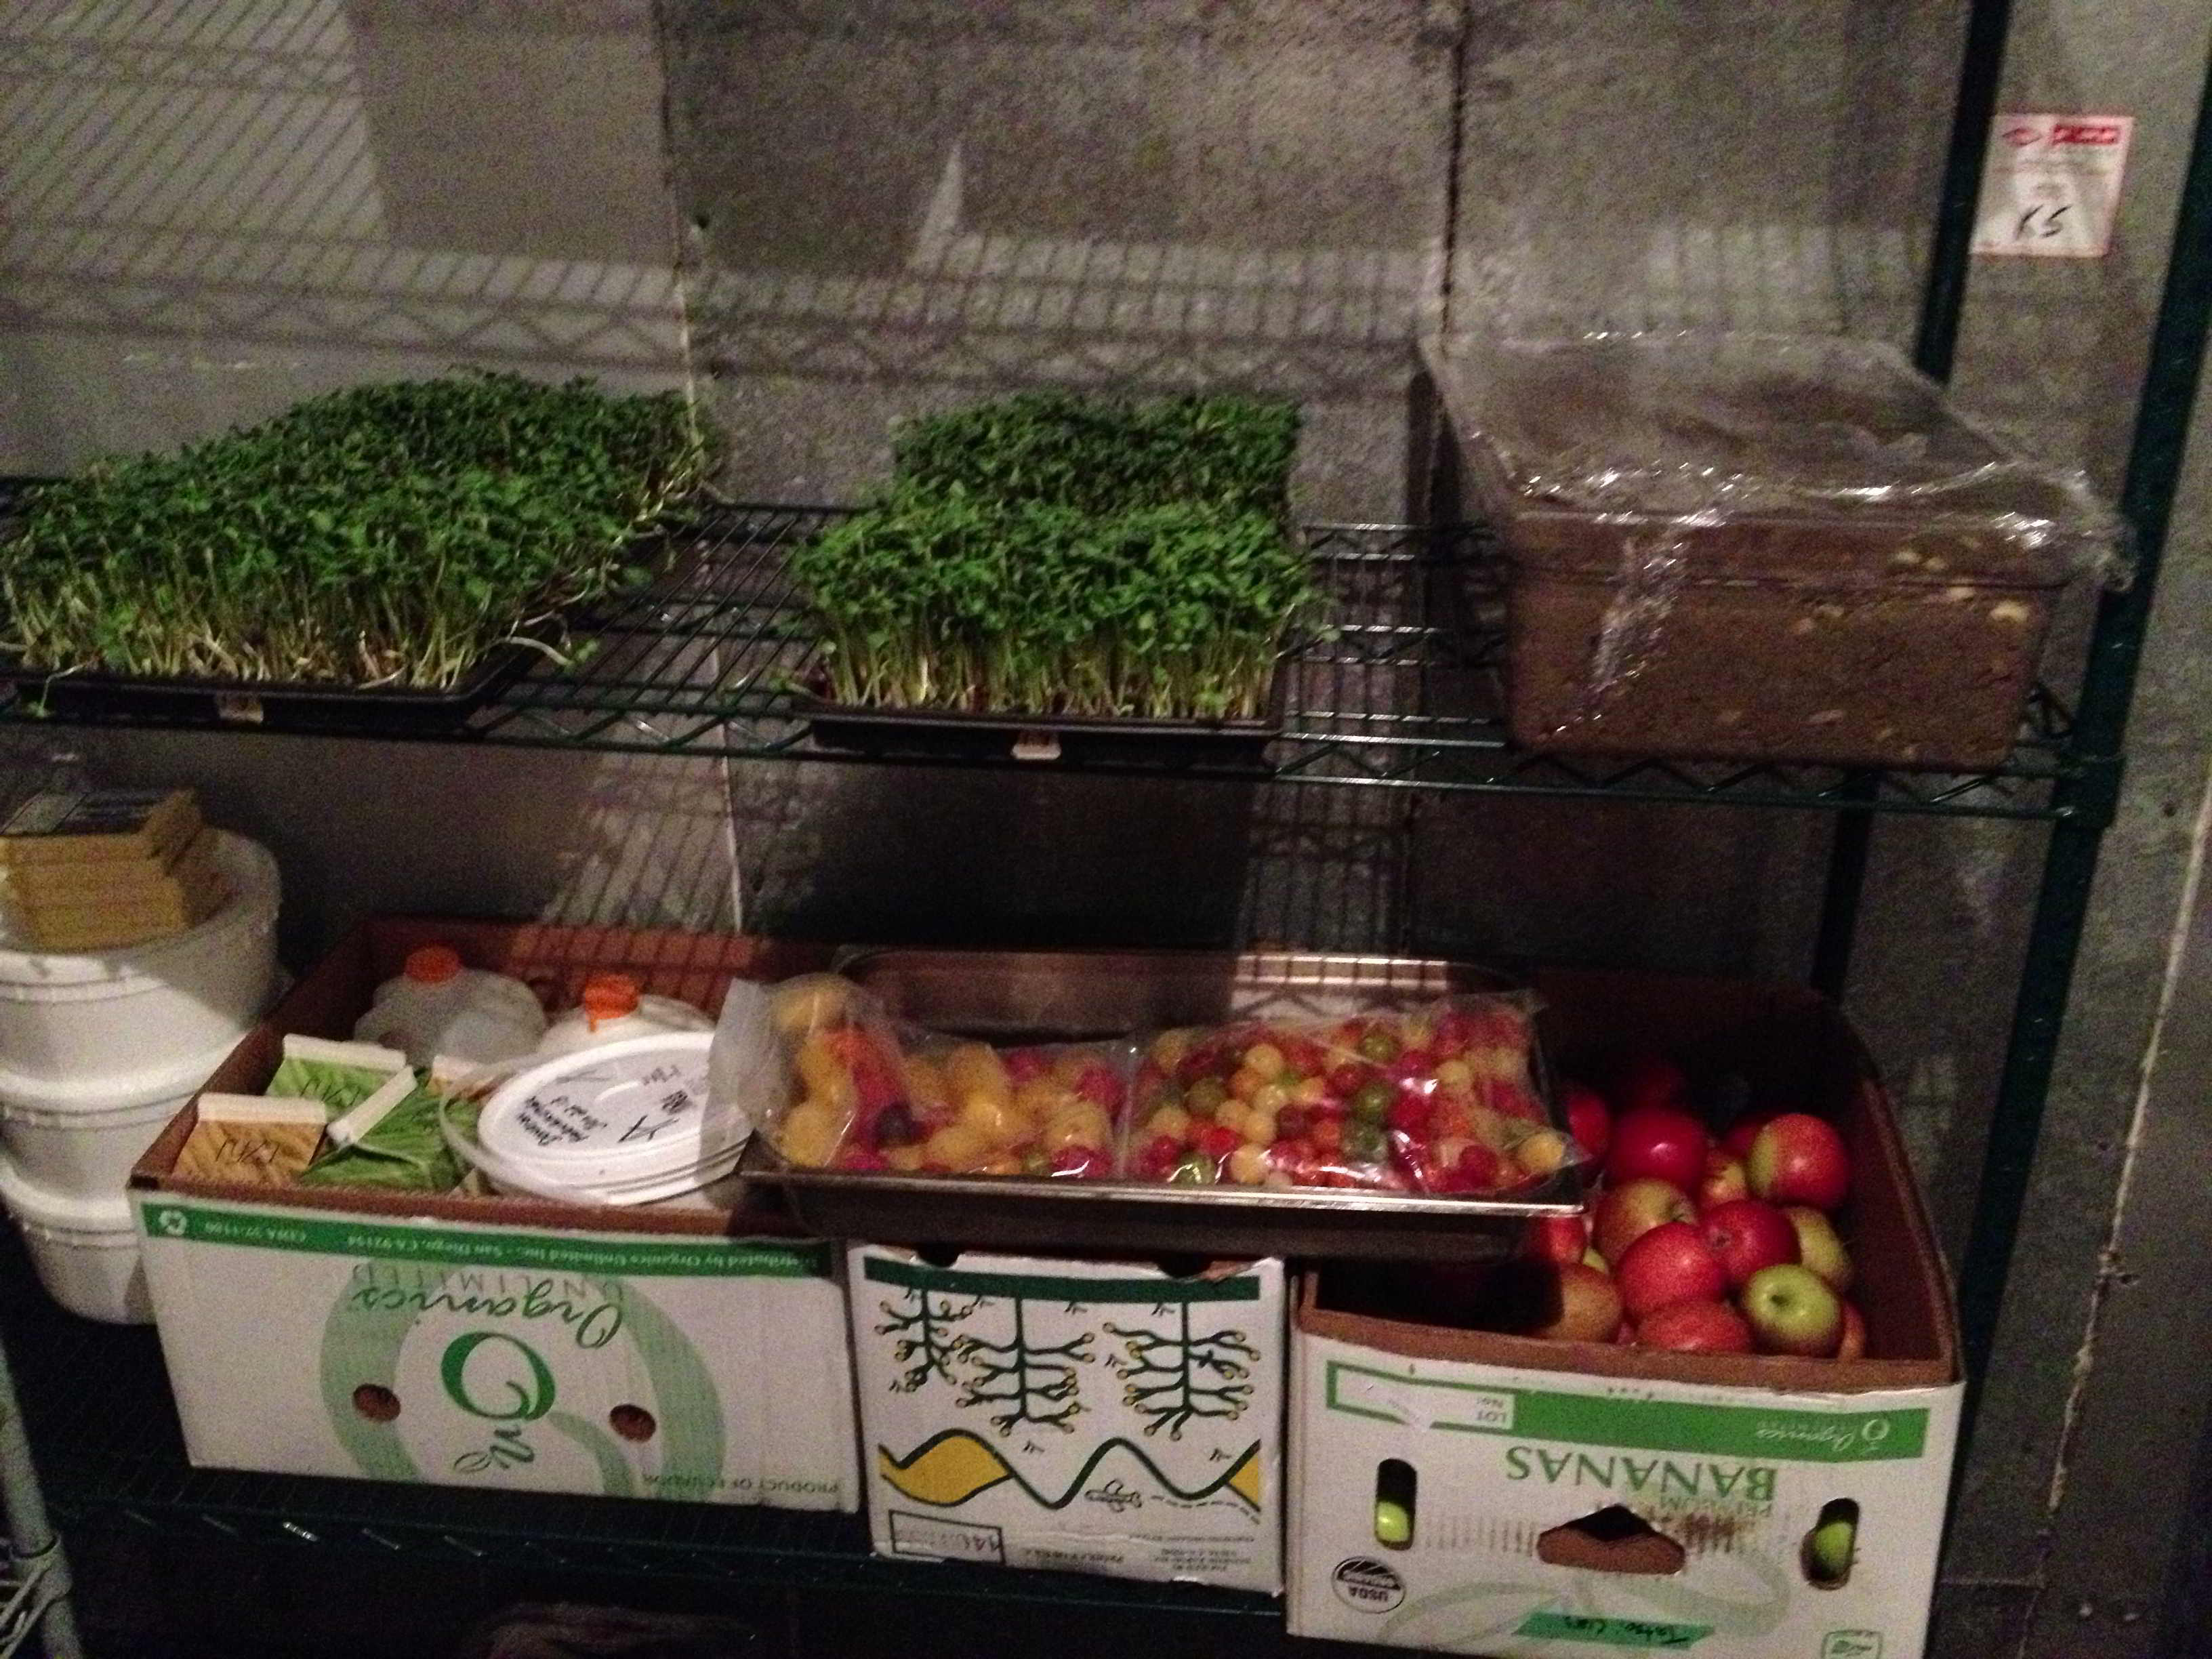 Micro-greens from Green City Acres, yogurt and cheese from Jerseyland Organics, apples from Urban Harvest, milk from Choices Markets.  These were just a few of our amazing food sponsors!